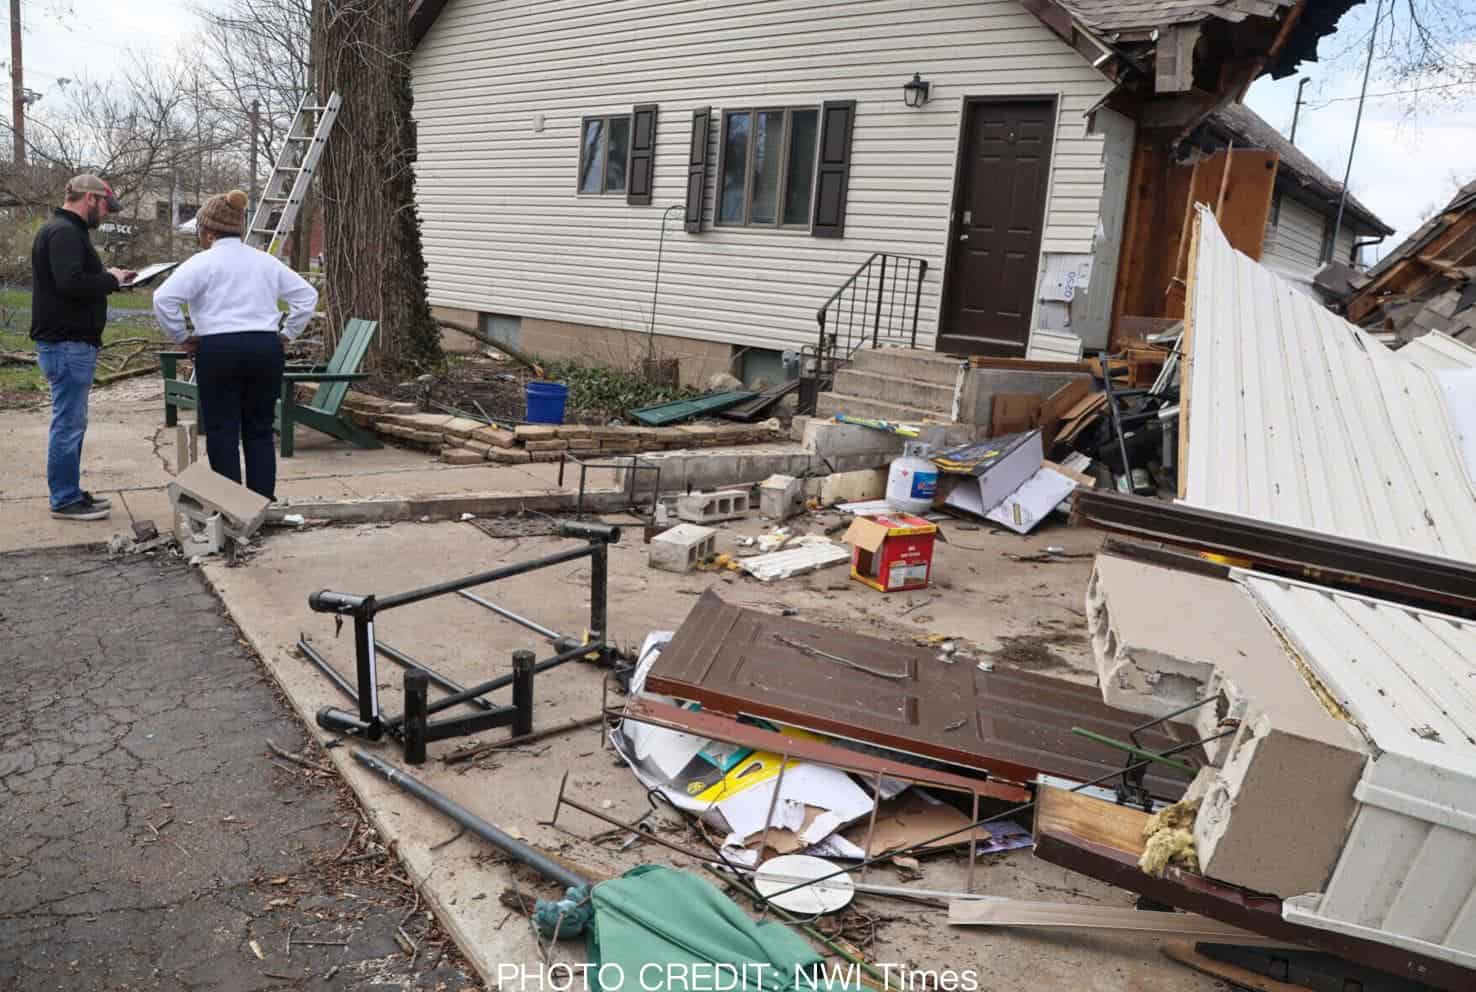 Featured image for “Restoring Merrillville Homes Following EF-1 Tornado and Storms ”